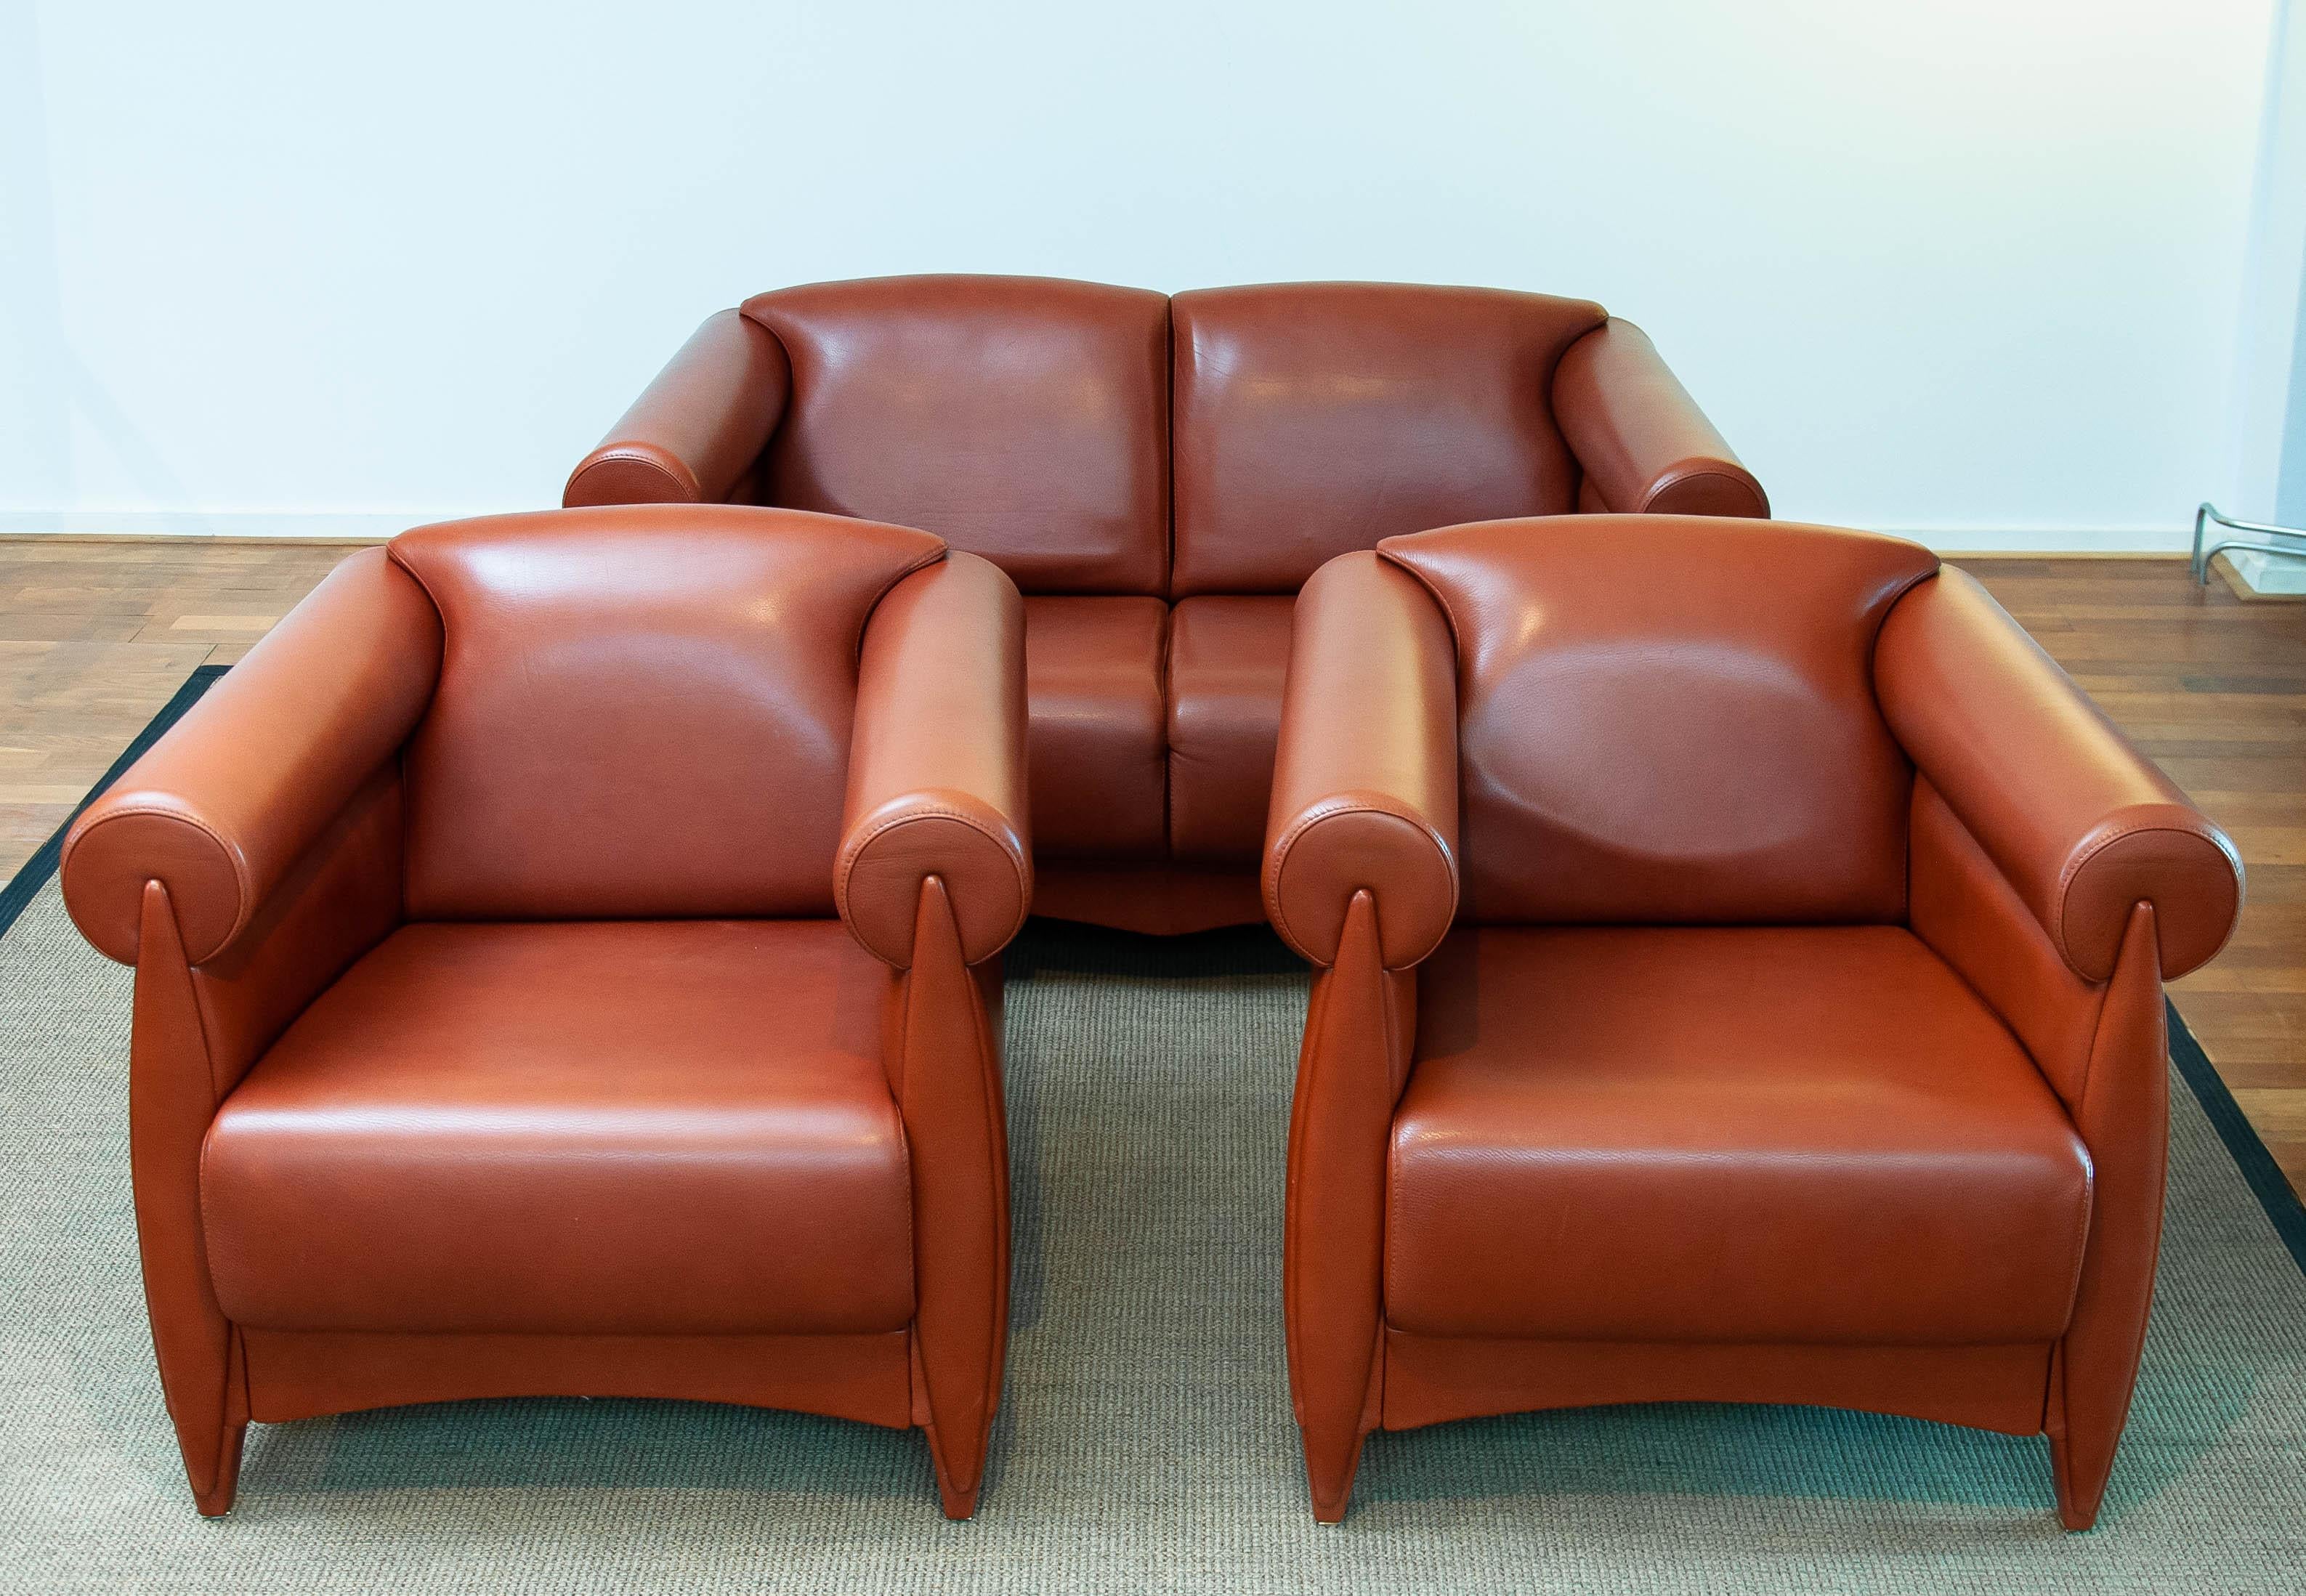 '80 Modern Art Deco Seating Group in Cognac Leather by Klaus Wettergren Denmark  For Sale 4